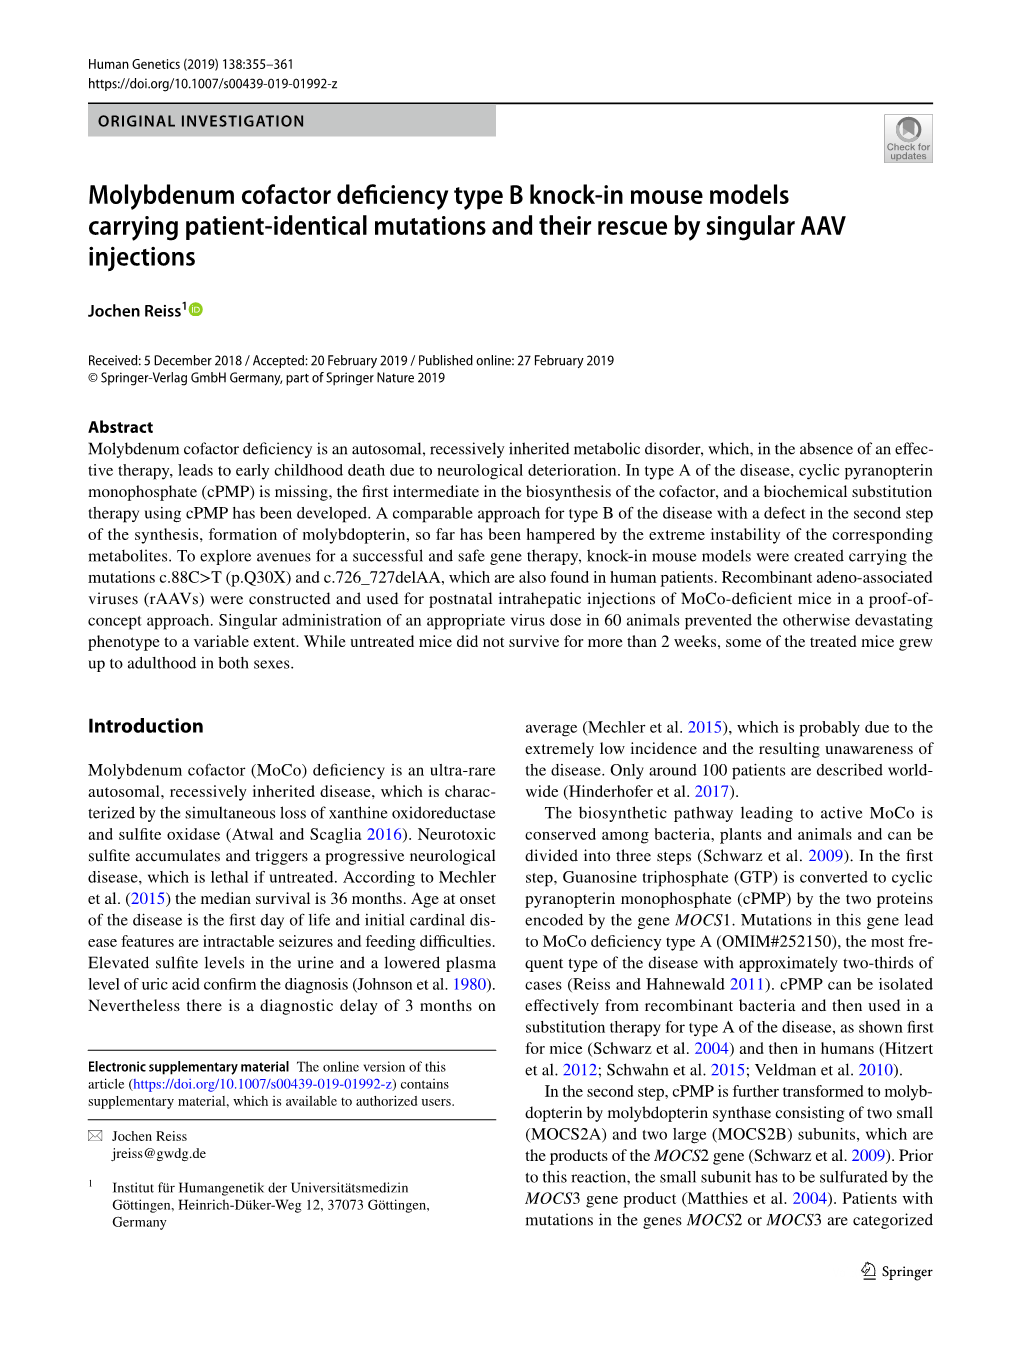 Molybdenum Cofactor Deficiency Type B Knock-In Mouse Models Carrying Patient-Identical Mutations and Their Rescue by Singular AAV Injections